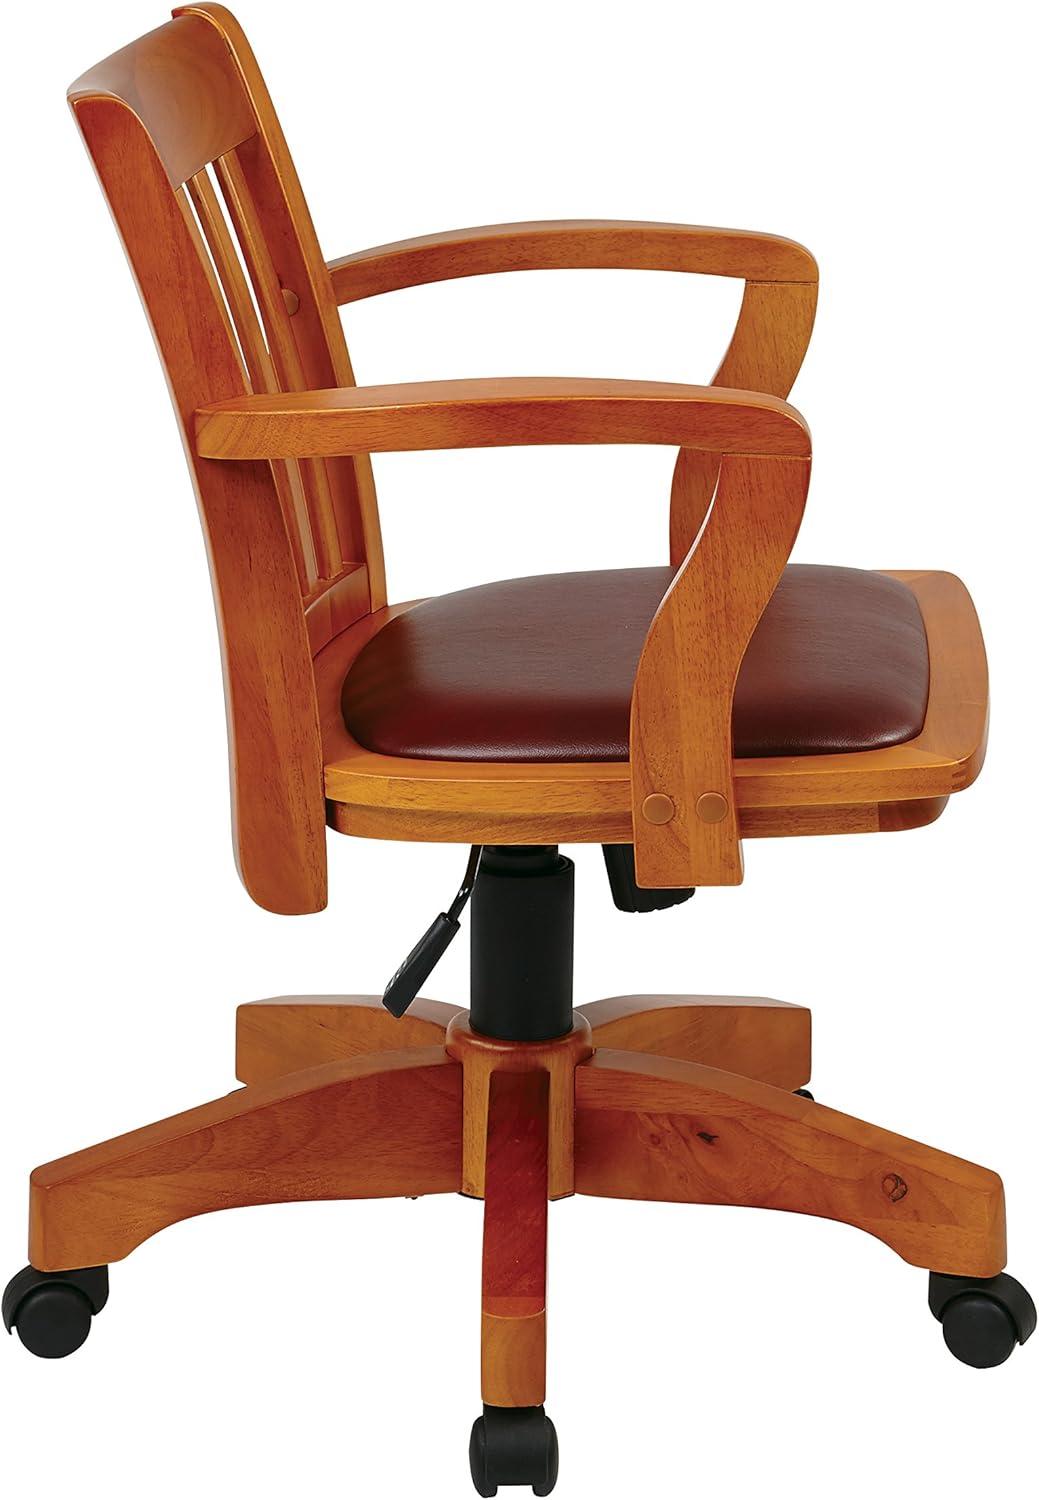 Deluxe Fruitwood Finish Wood Banker's Desk Chair with Brown Vinyl Seat